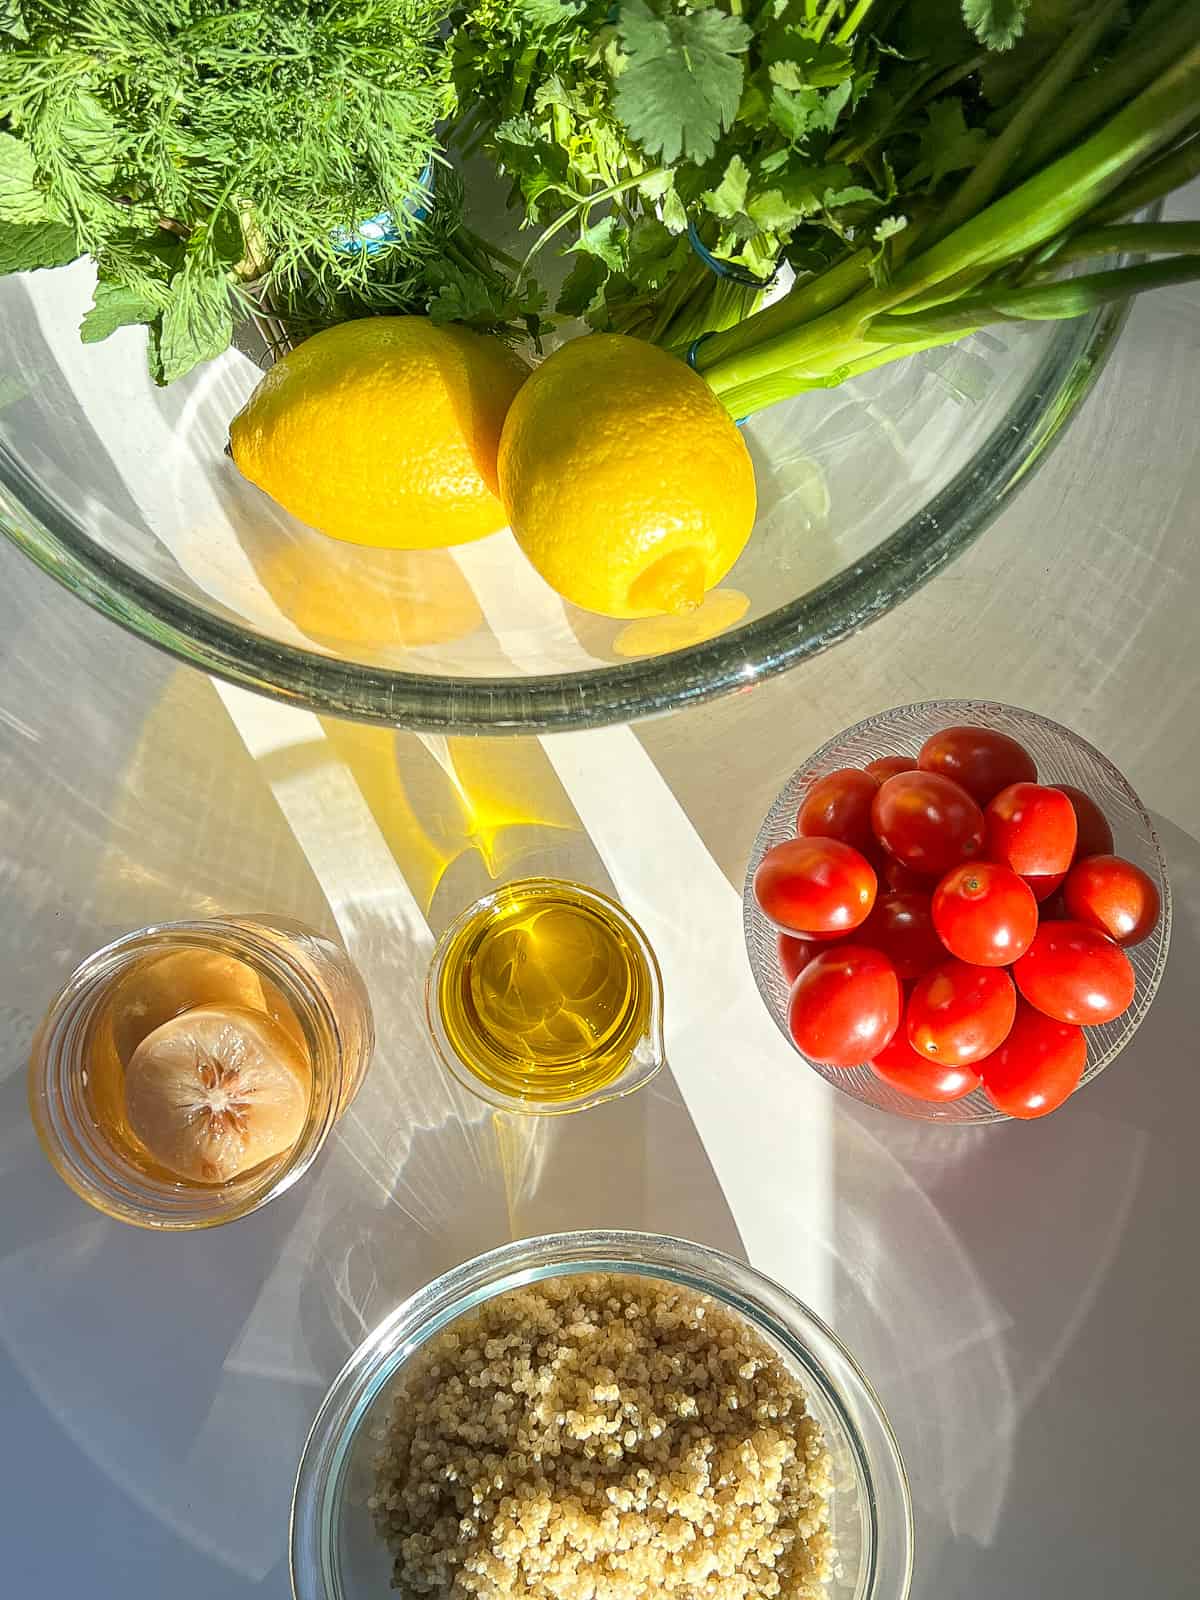 An image of the ingredients needed to make quinoa tabbouleh.